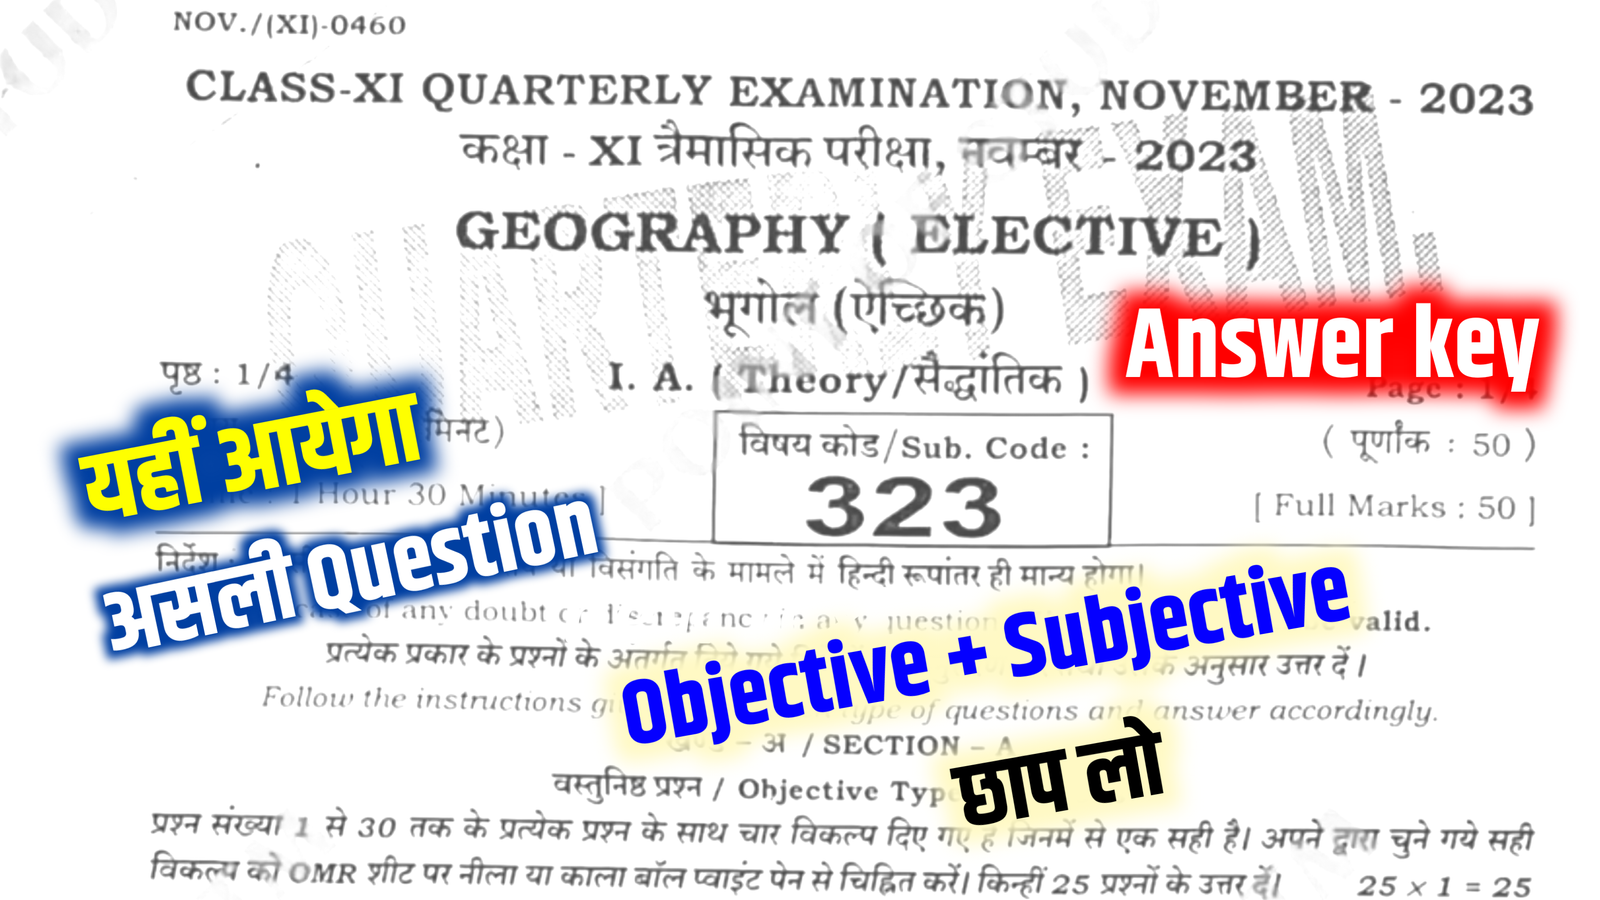 11th Geography Objective Subjective